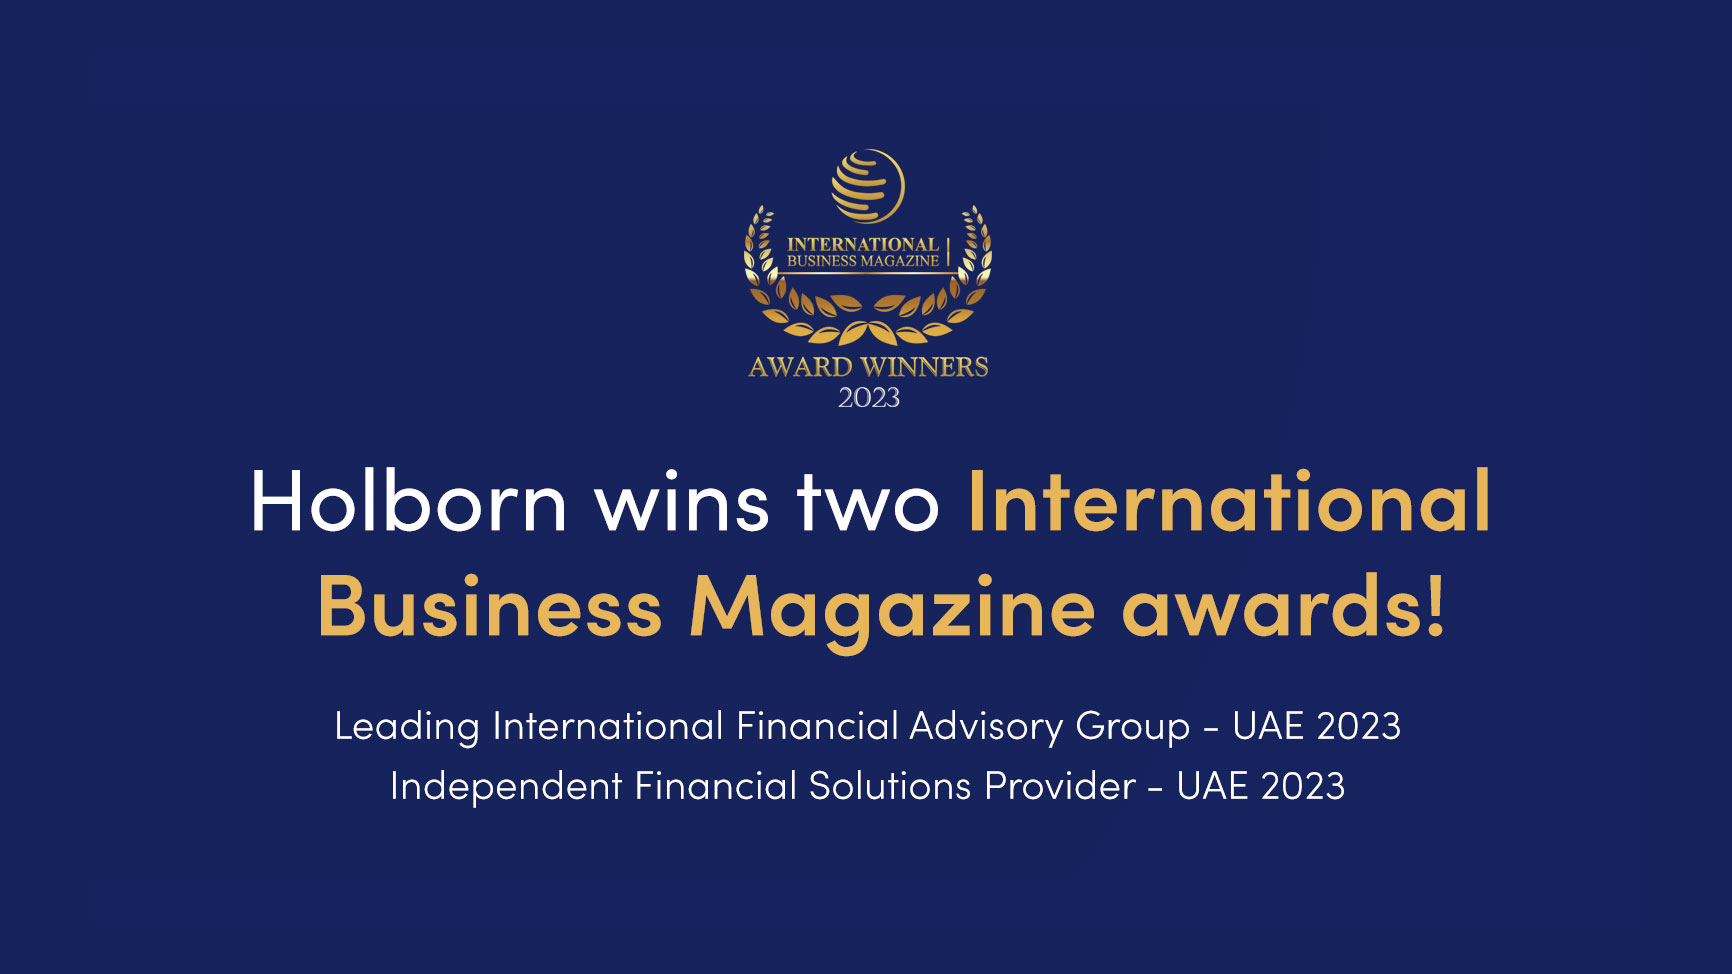 Holborn Assets takes home two golds at the 2023 International Business Magazine Awards